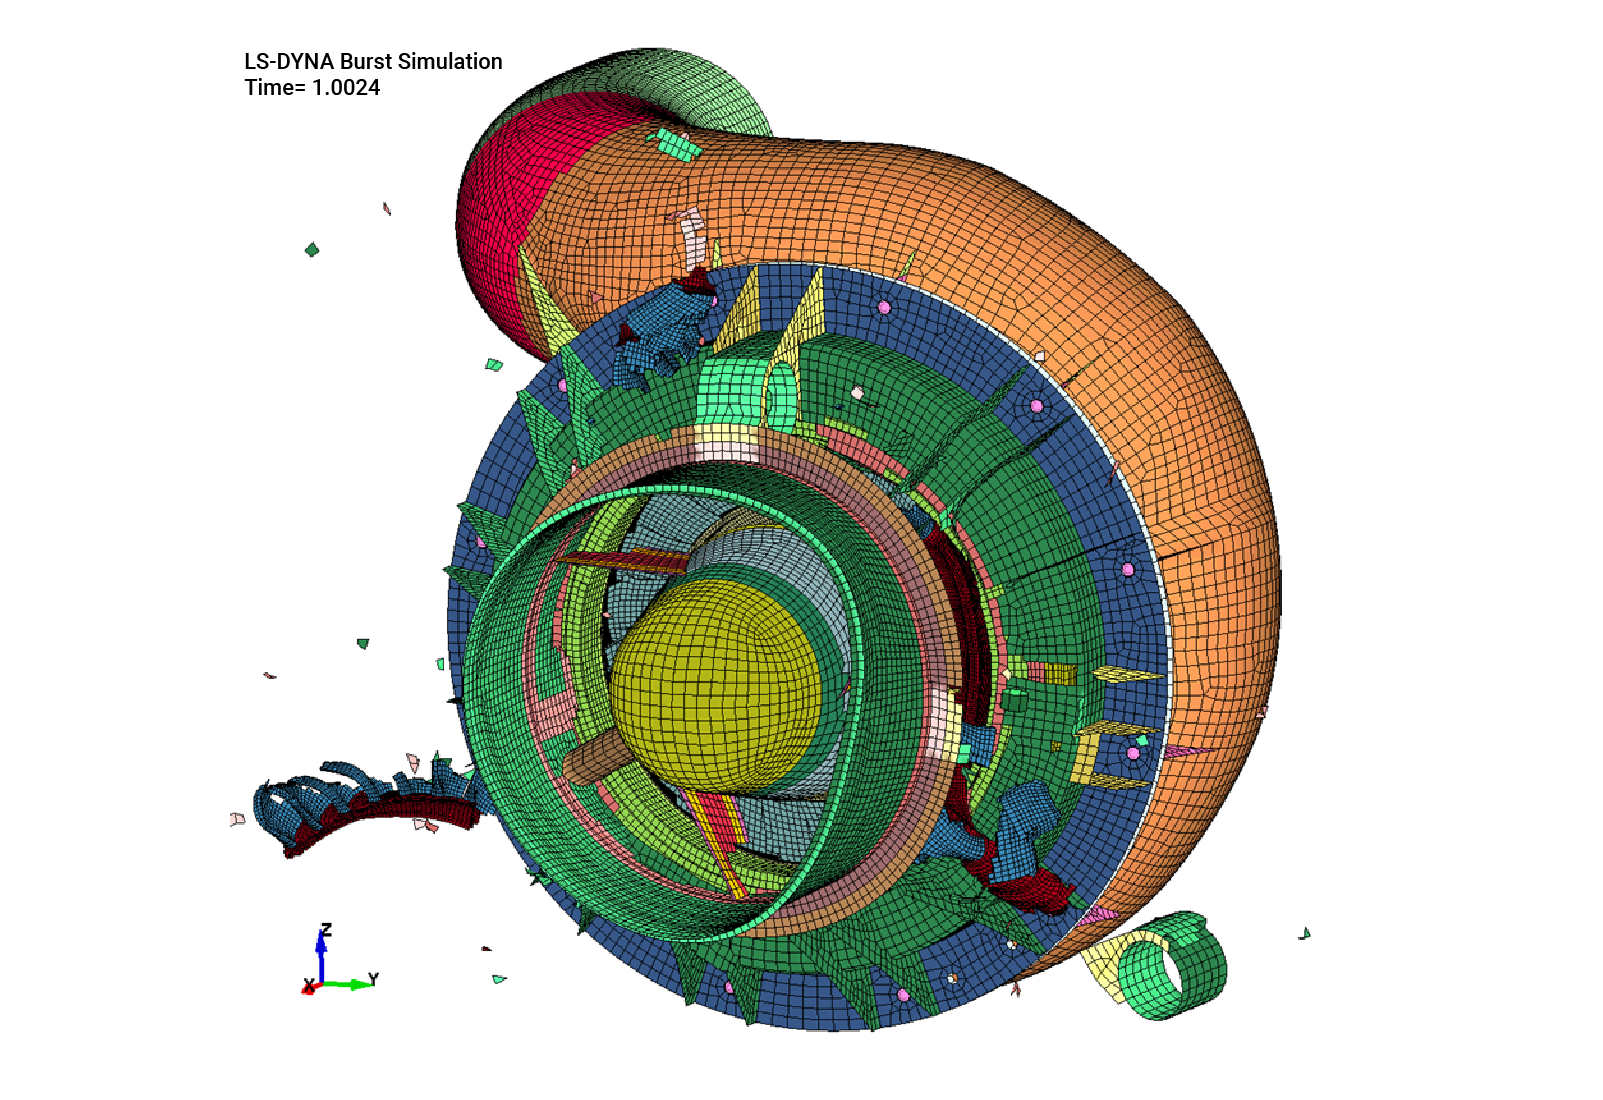 Figure 5: The LS-DYNA simulation was validated against experimental data through the comparison of blade fragments and damage done to the turbine housing.